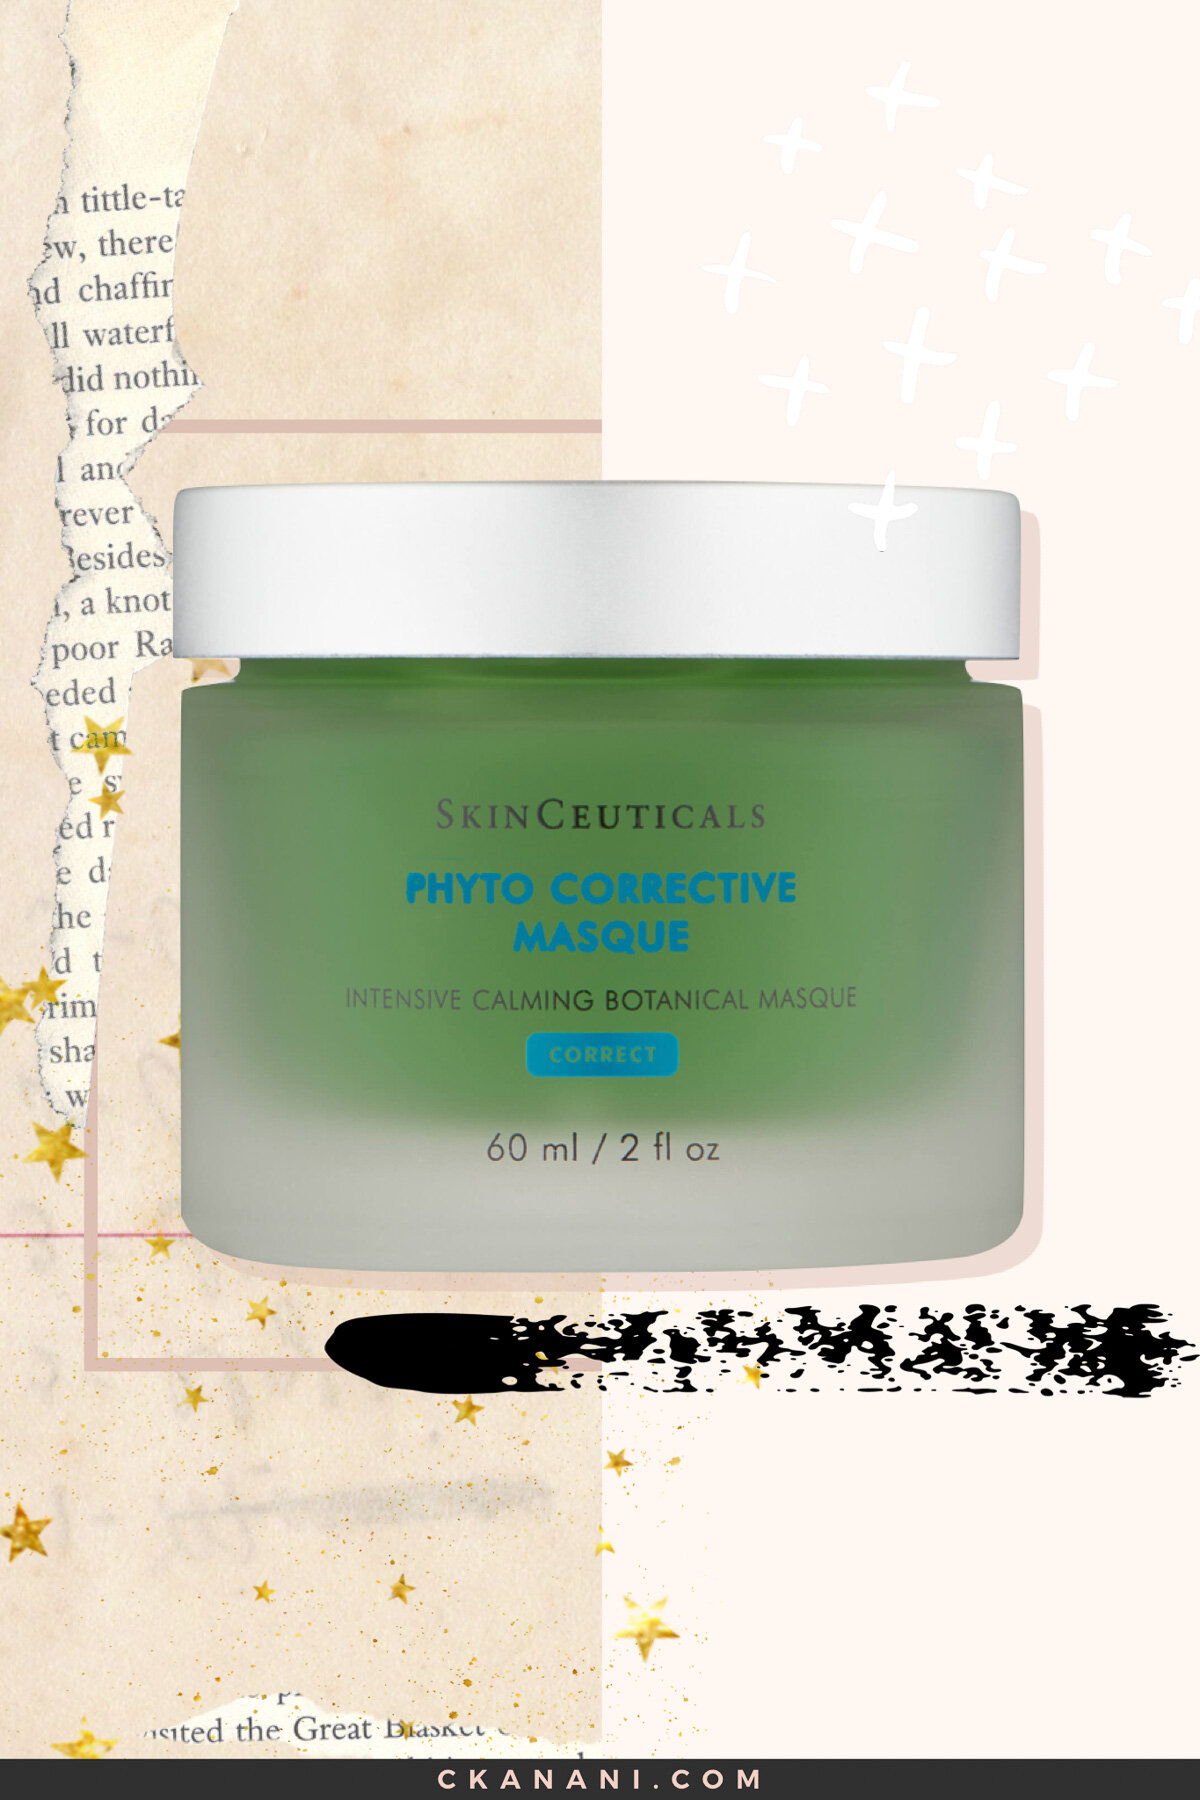 SkinCeuticals Phyto Corrective Masque Face Mask: The Best Face Masks